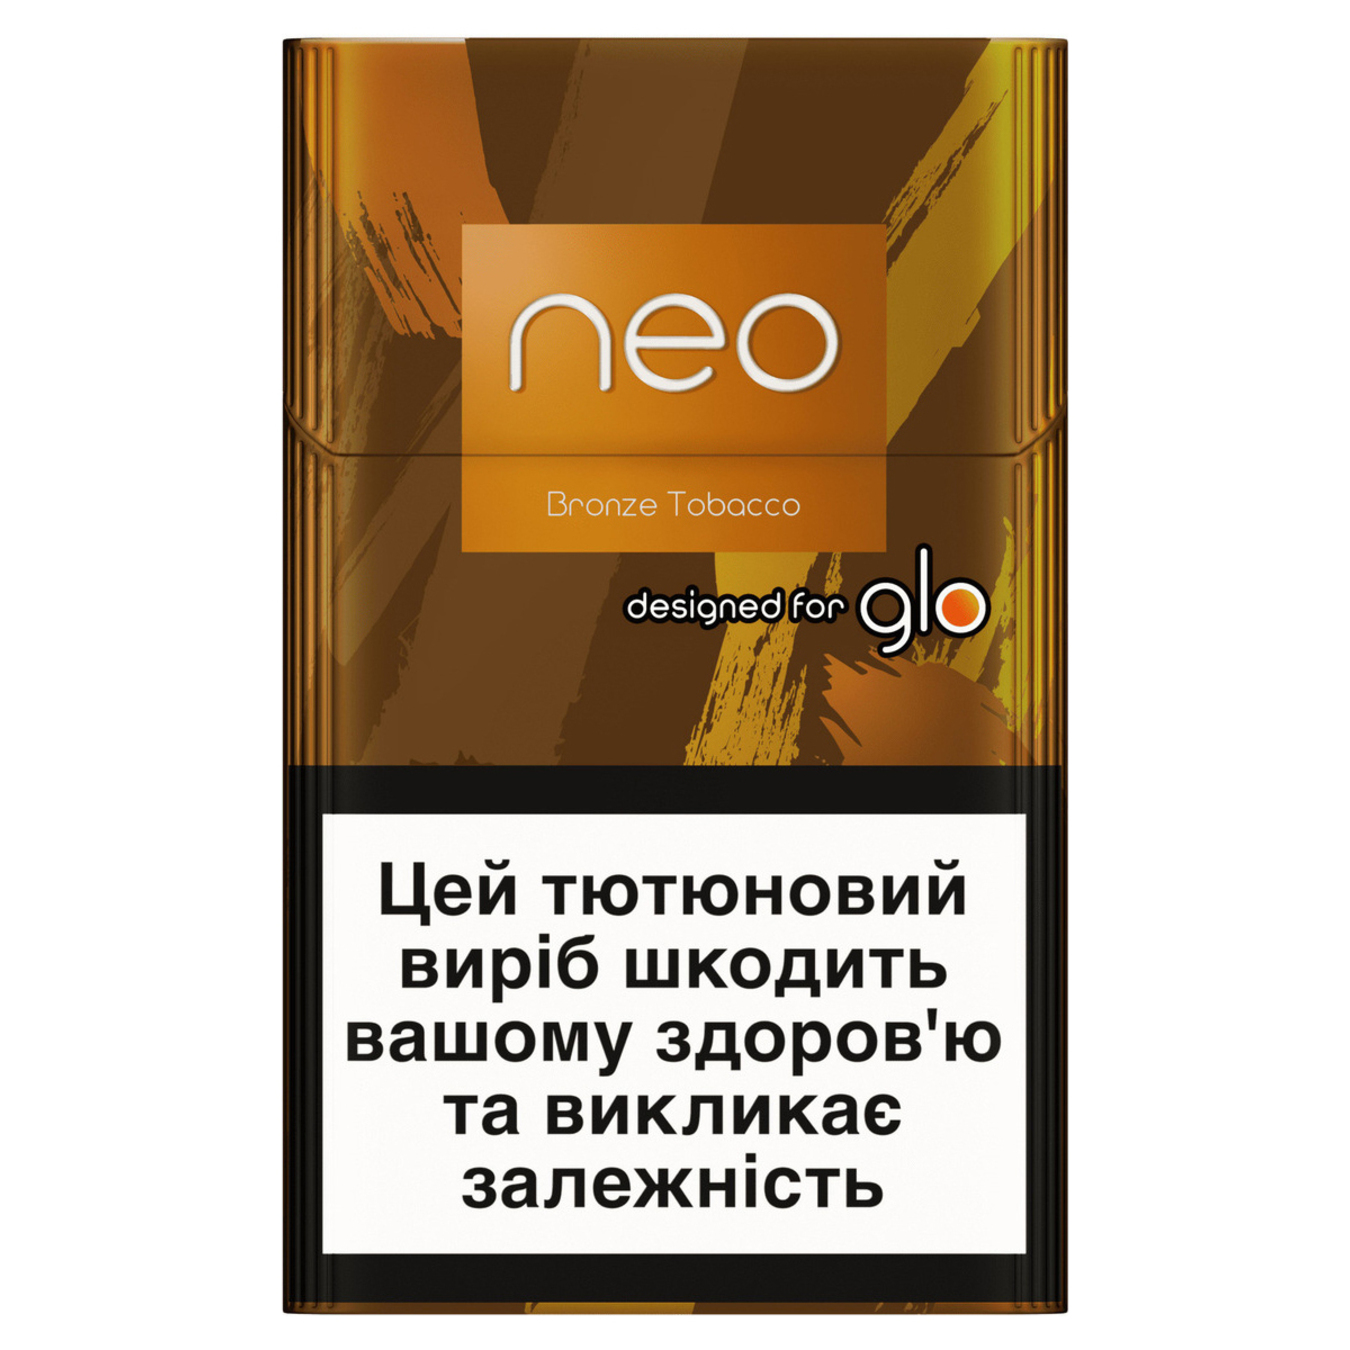 Sticks Neo Demi Bronze Tobacco 20pcs (the price is indicated without excise tax)